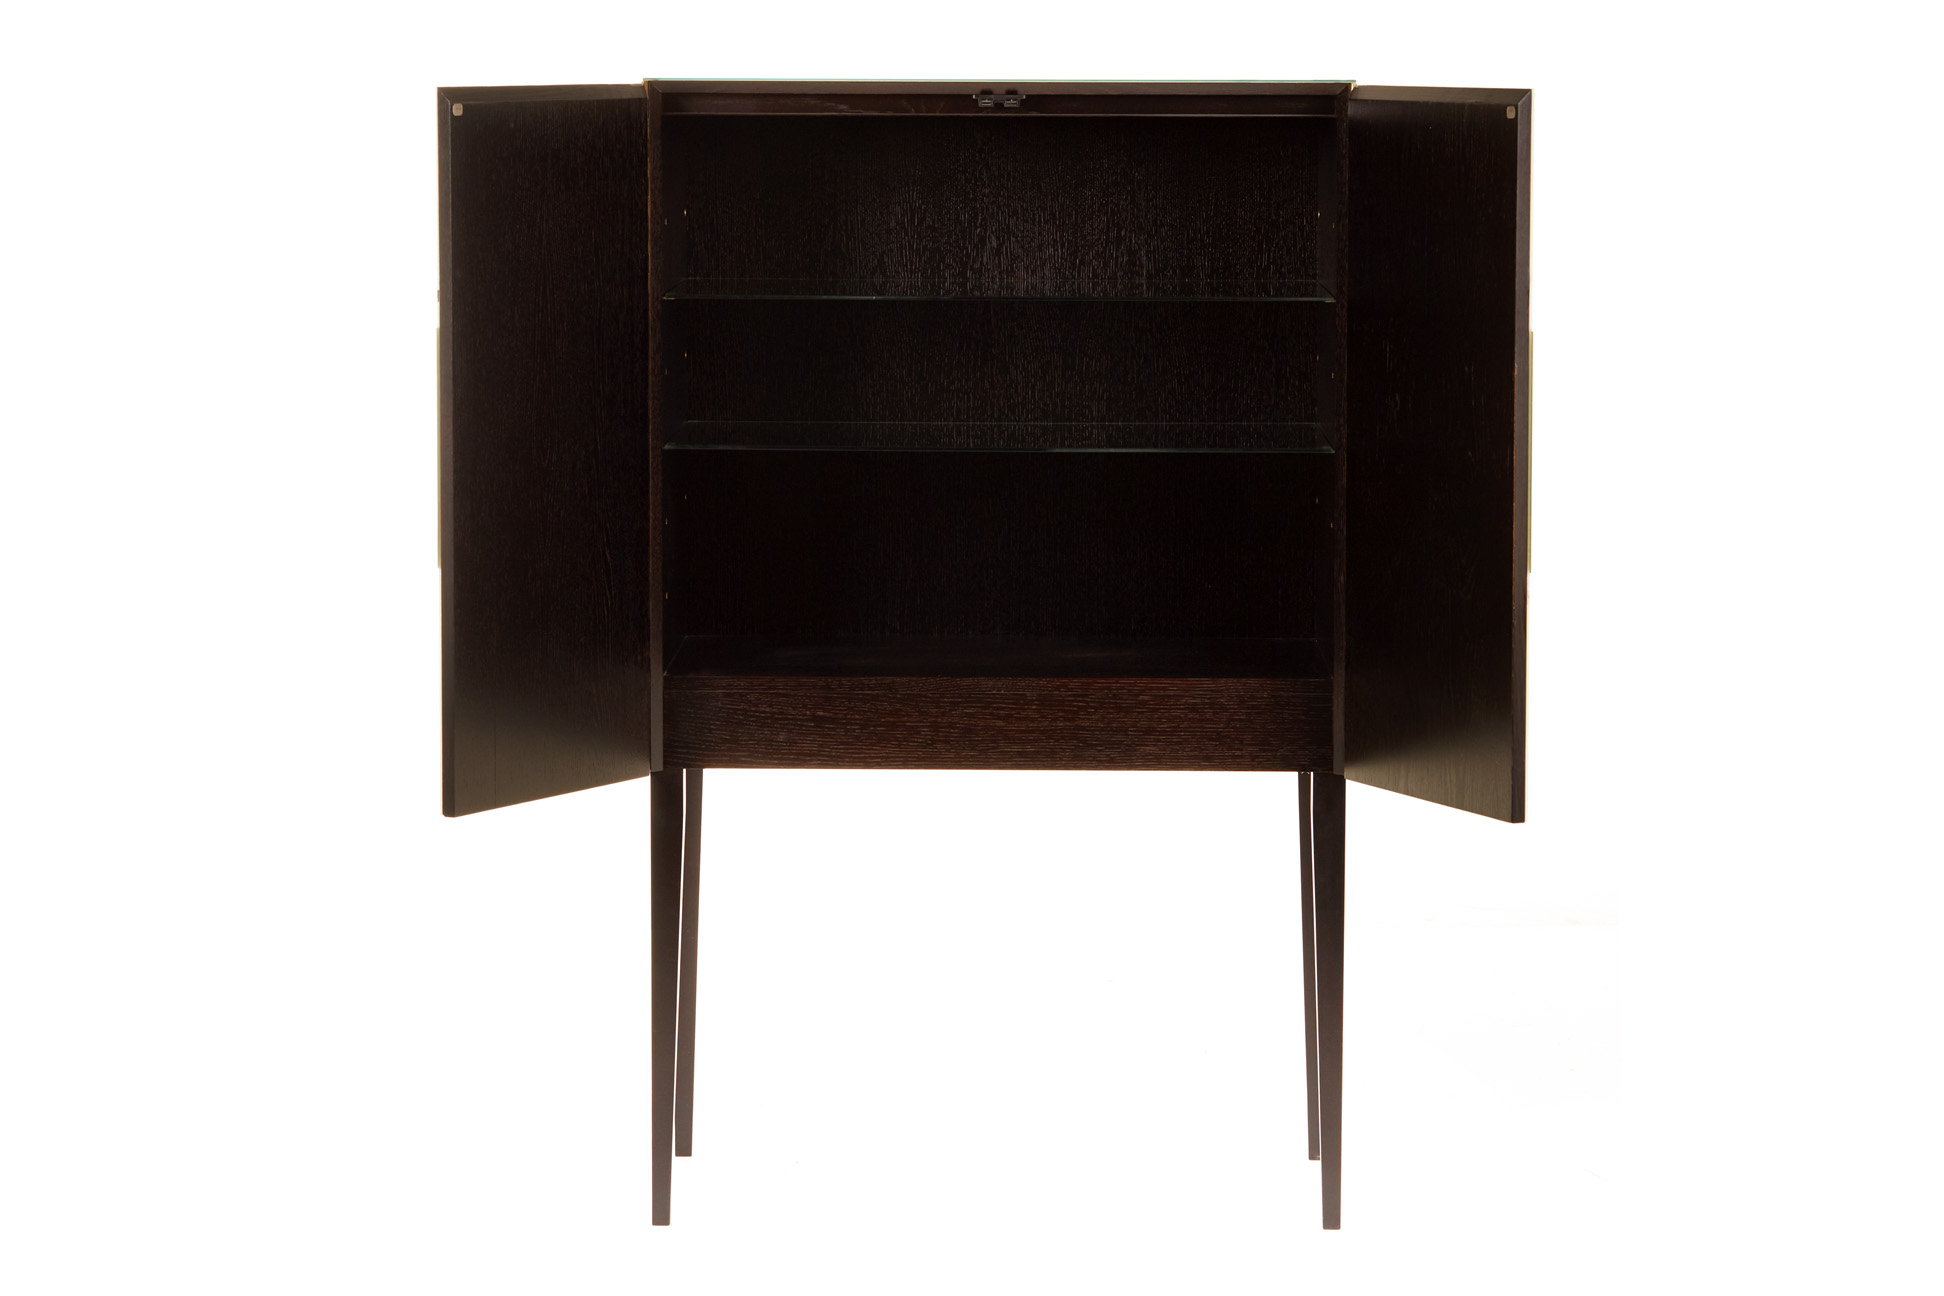 A KNOWLES & CHRISTOU 'LULU' CABINET - Image 8 of 8